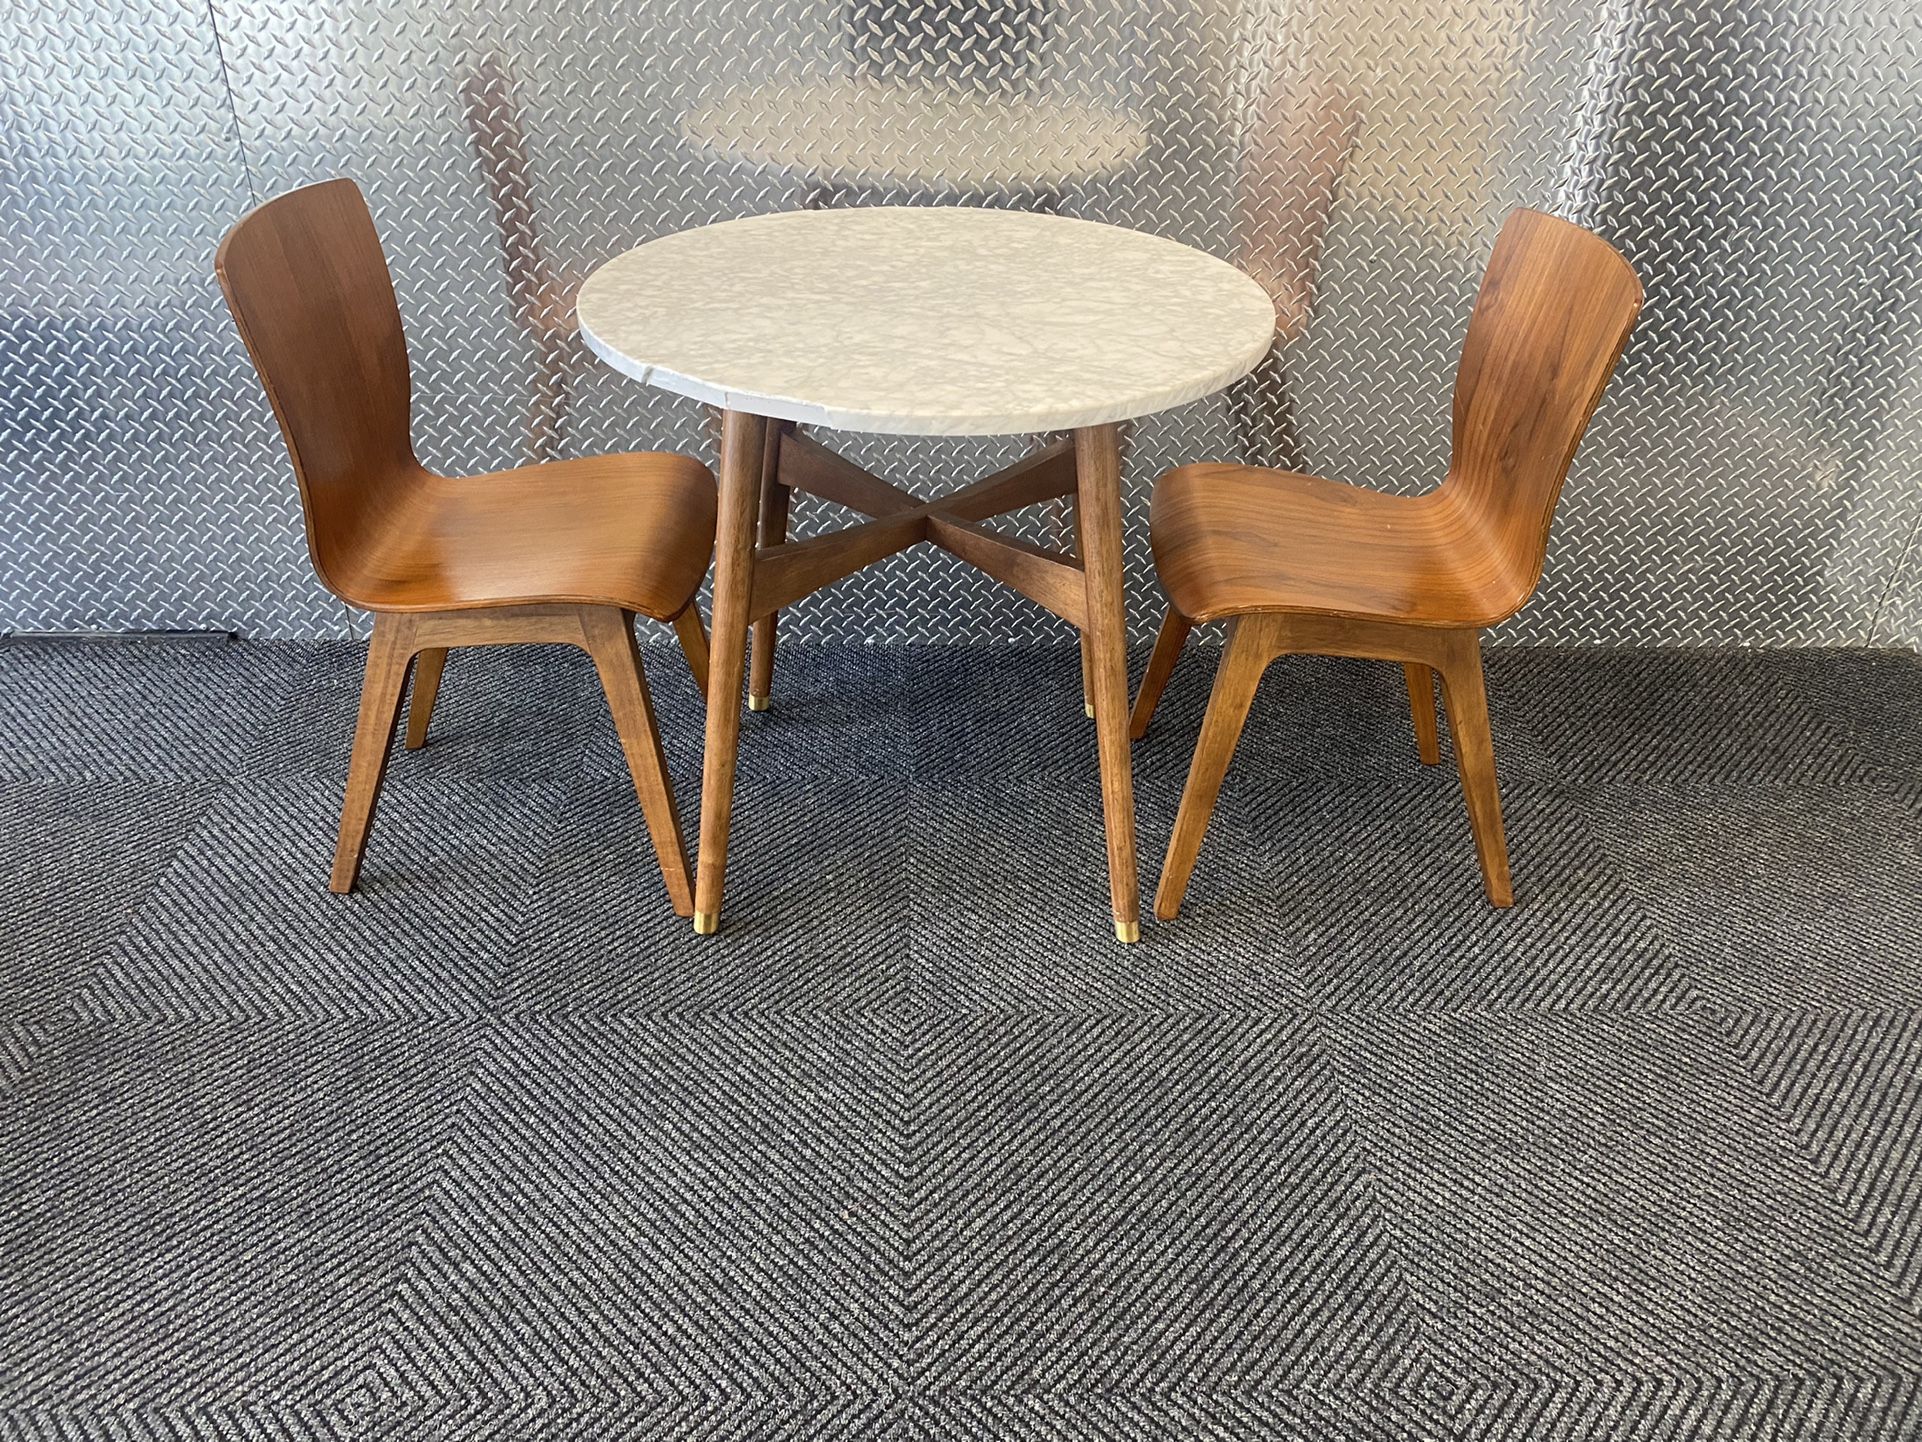 Small West Elm Table With Two West Elm Chairs 